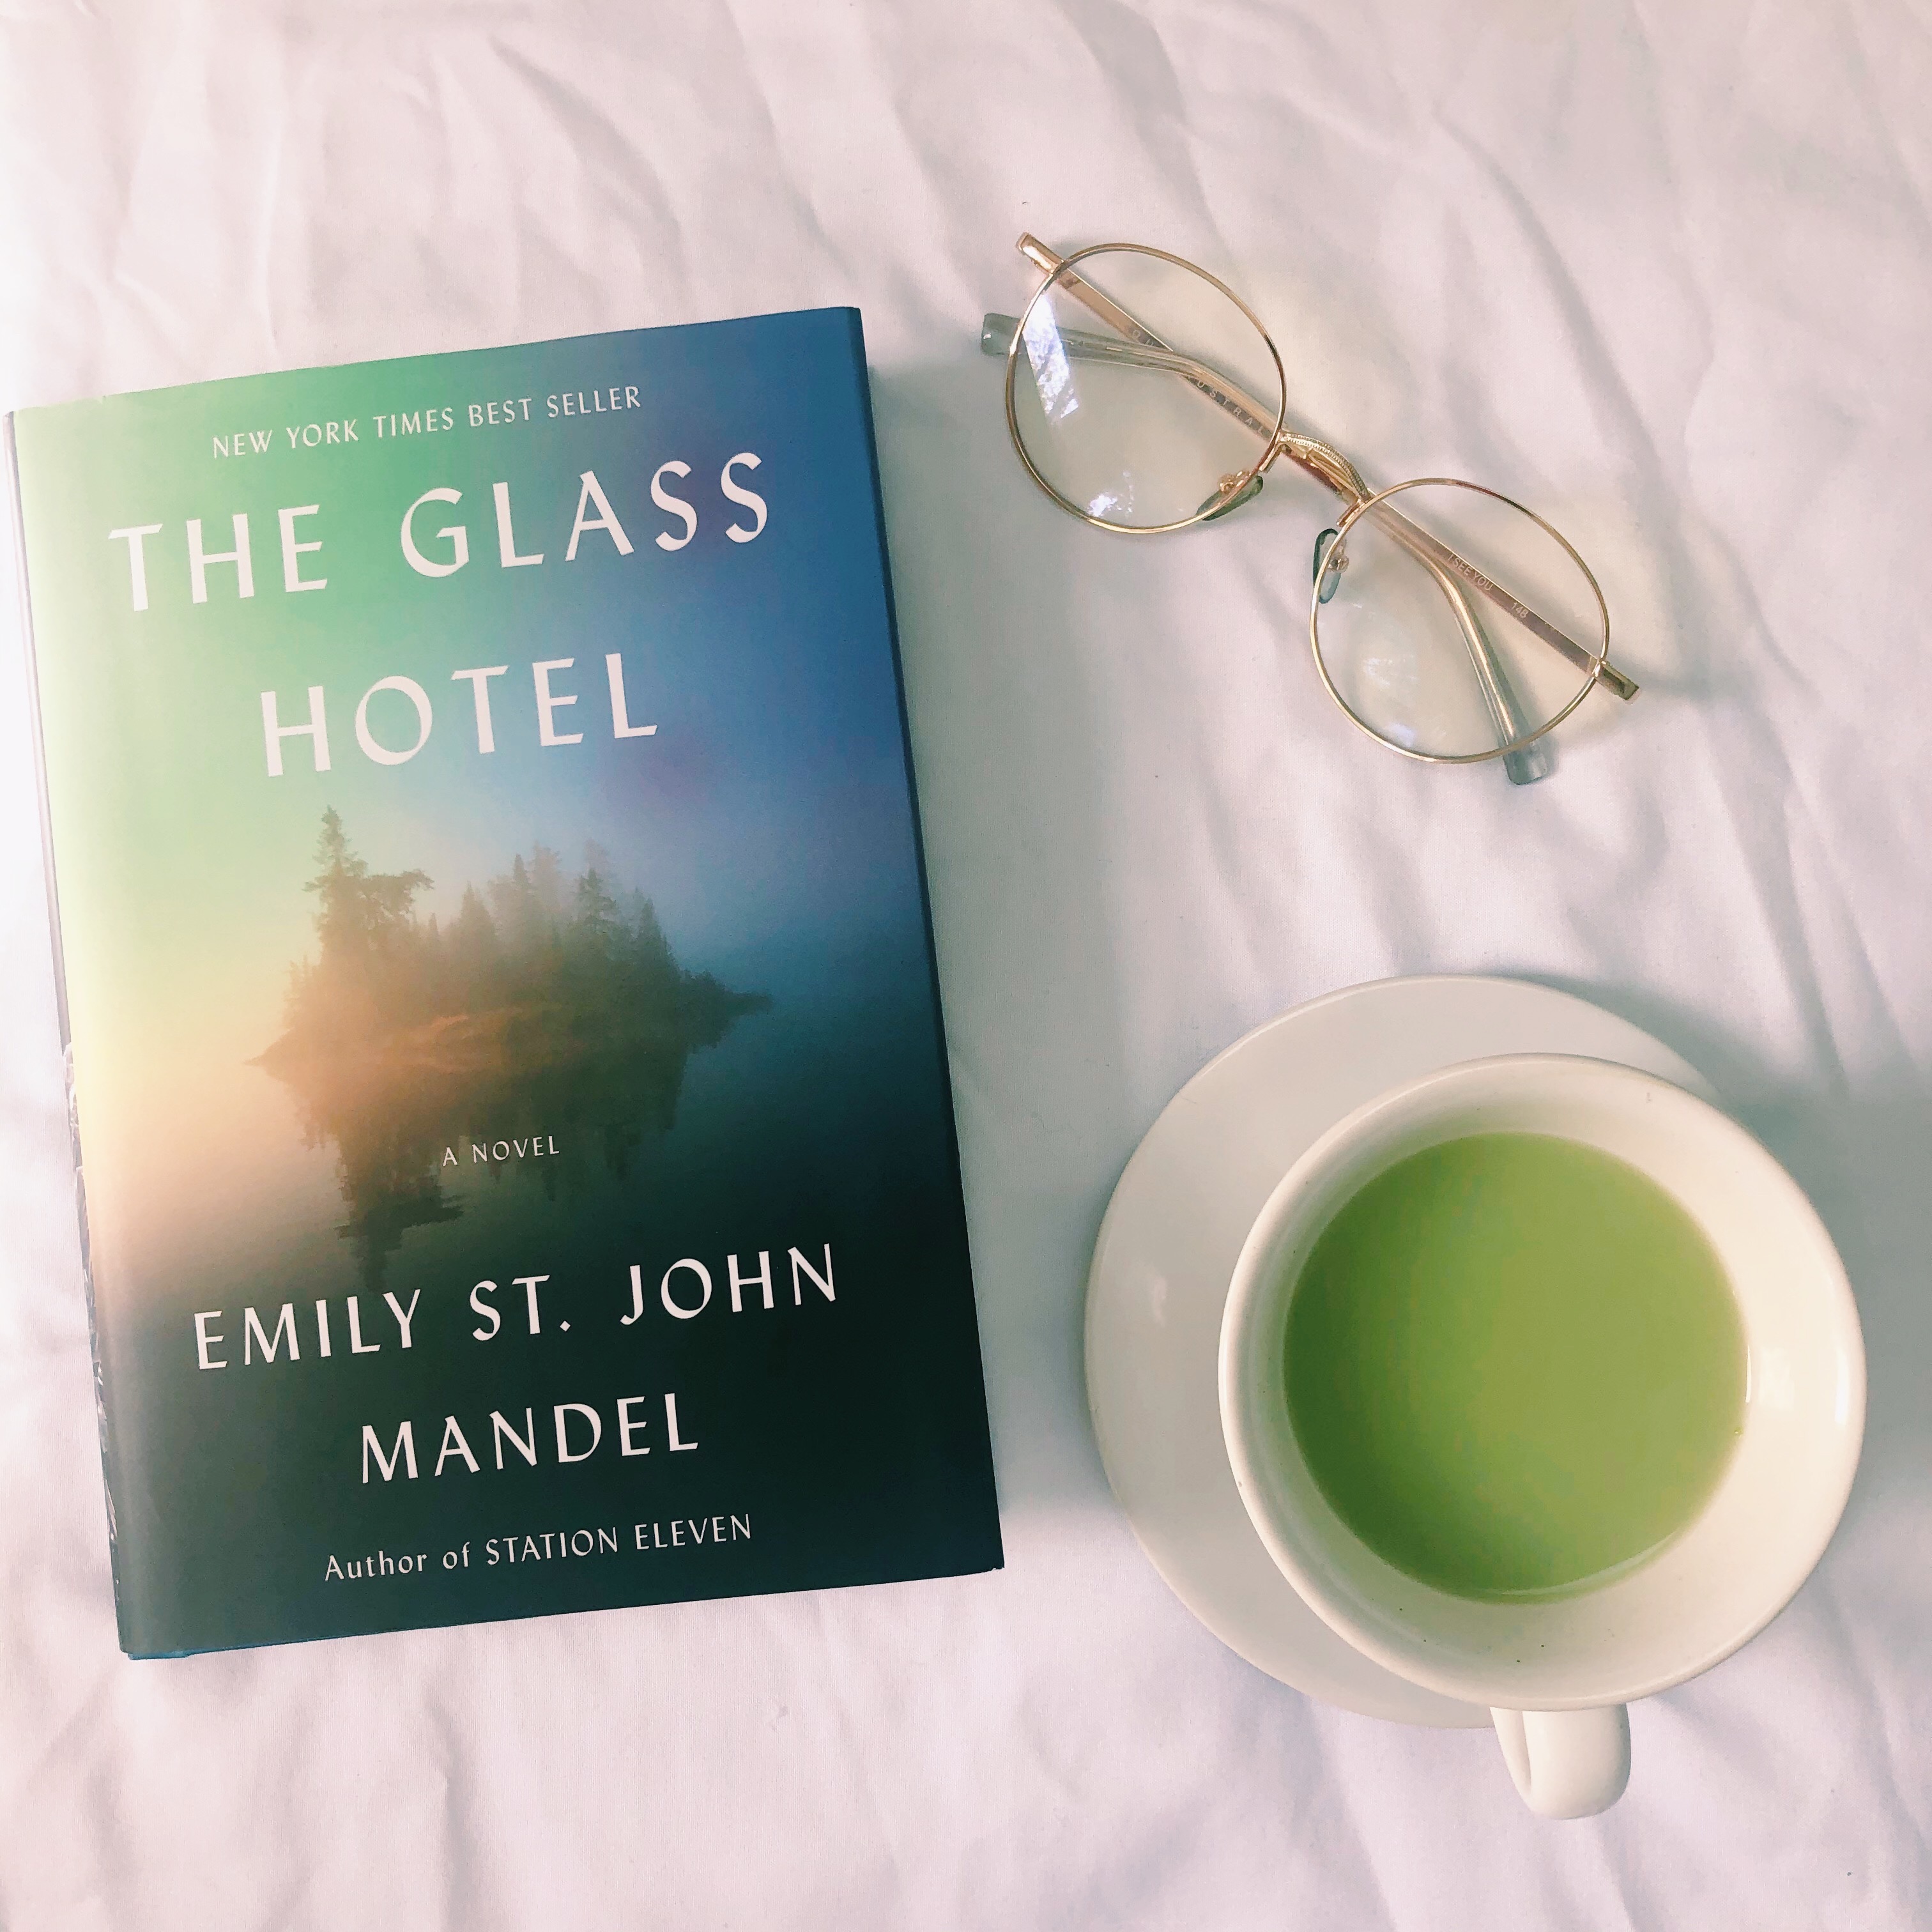 Get The glass hotel by emily st john mandel For Free